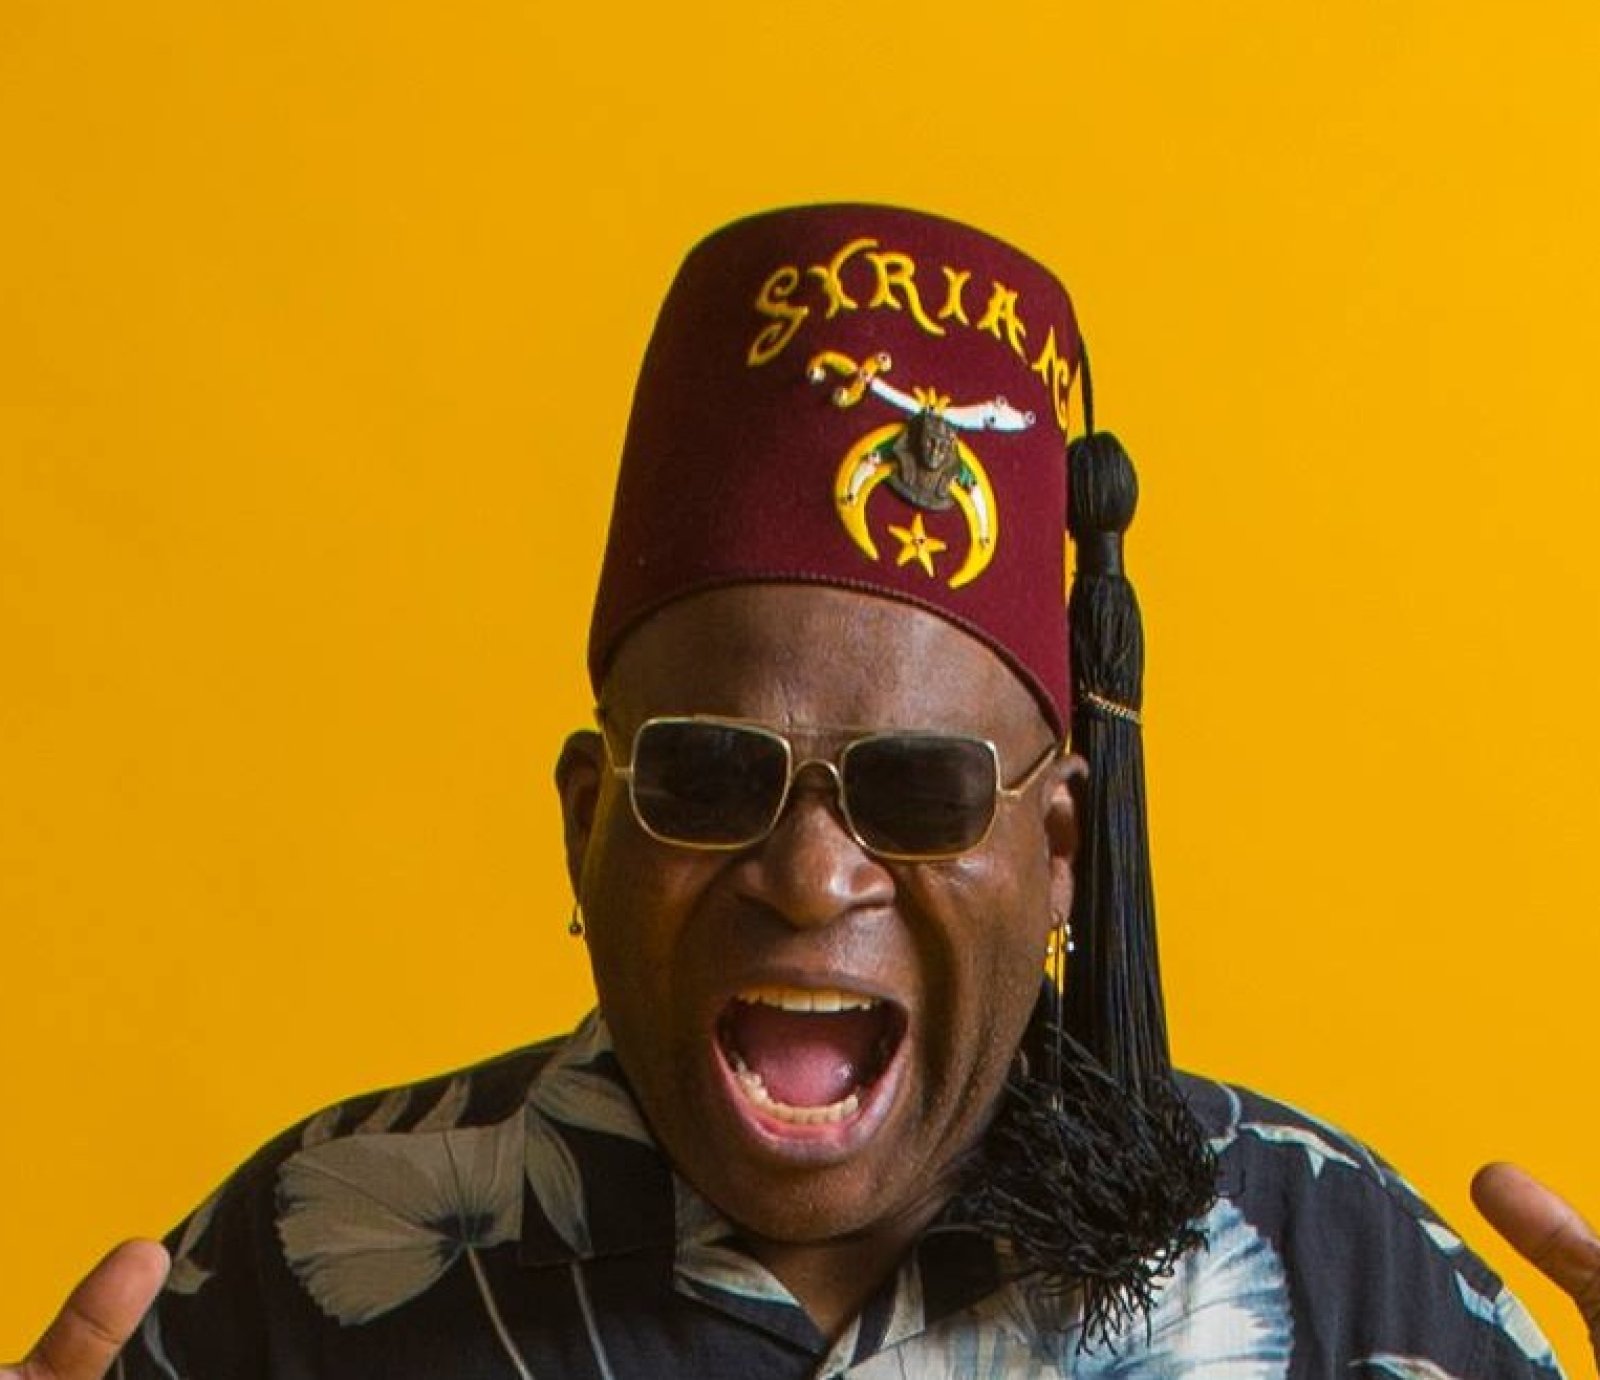 Barrence Whitfield